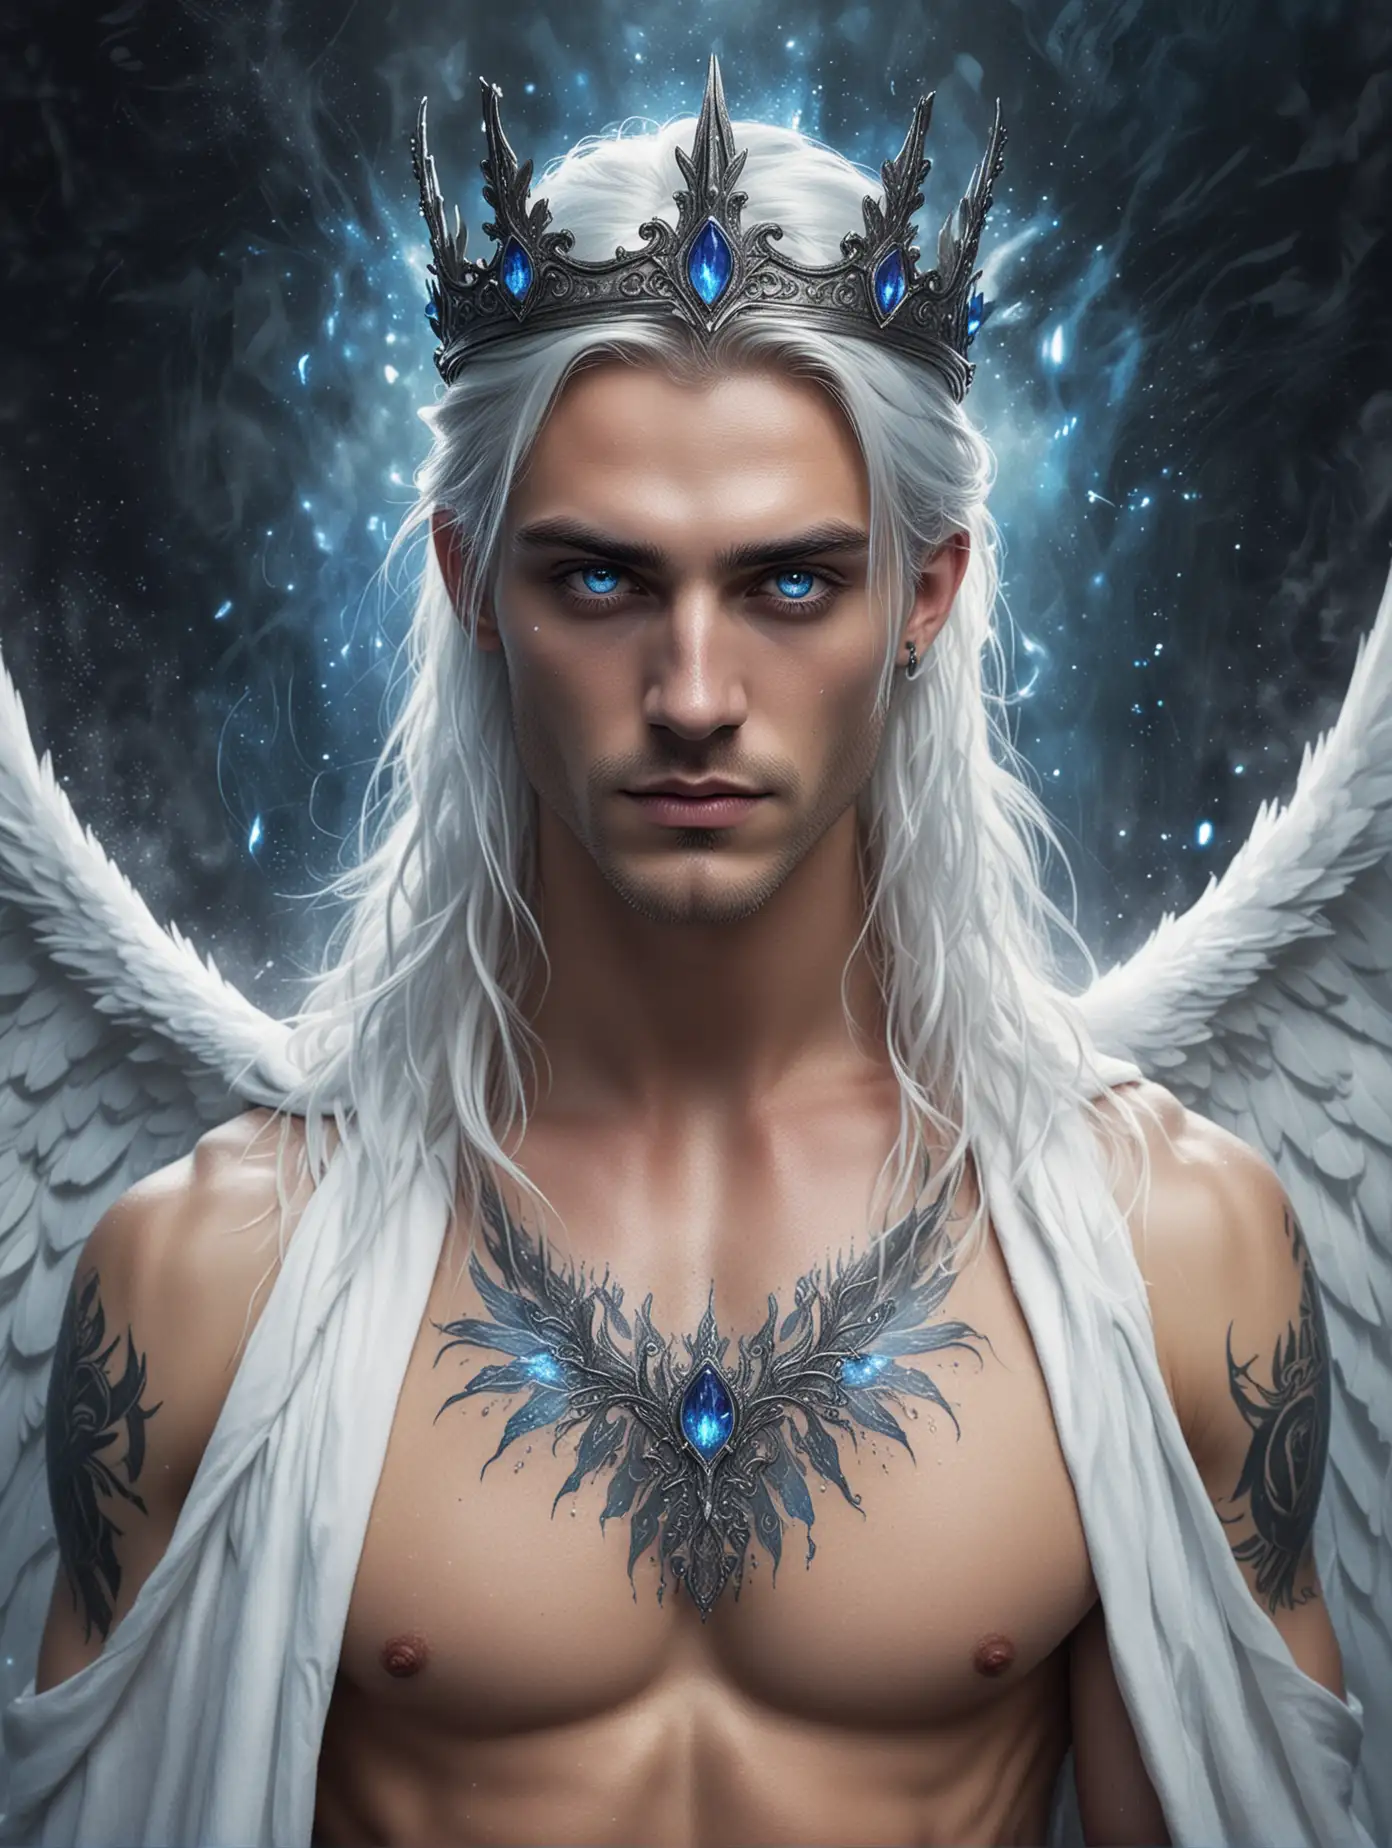 Majestic Fae King with Ethereal Wings and Regal Attire Portrait